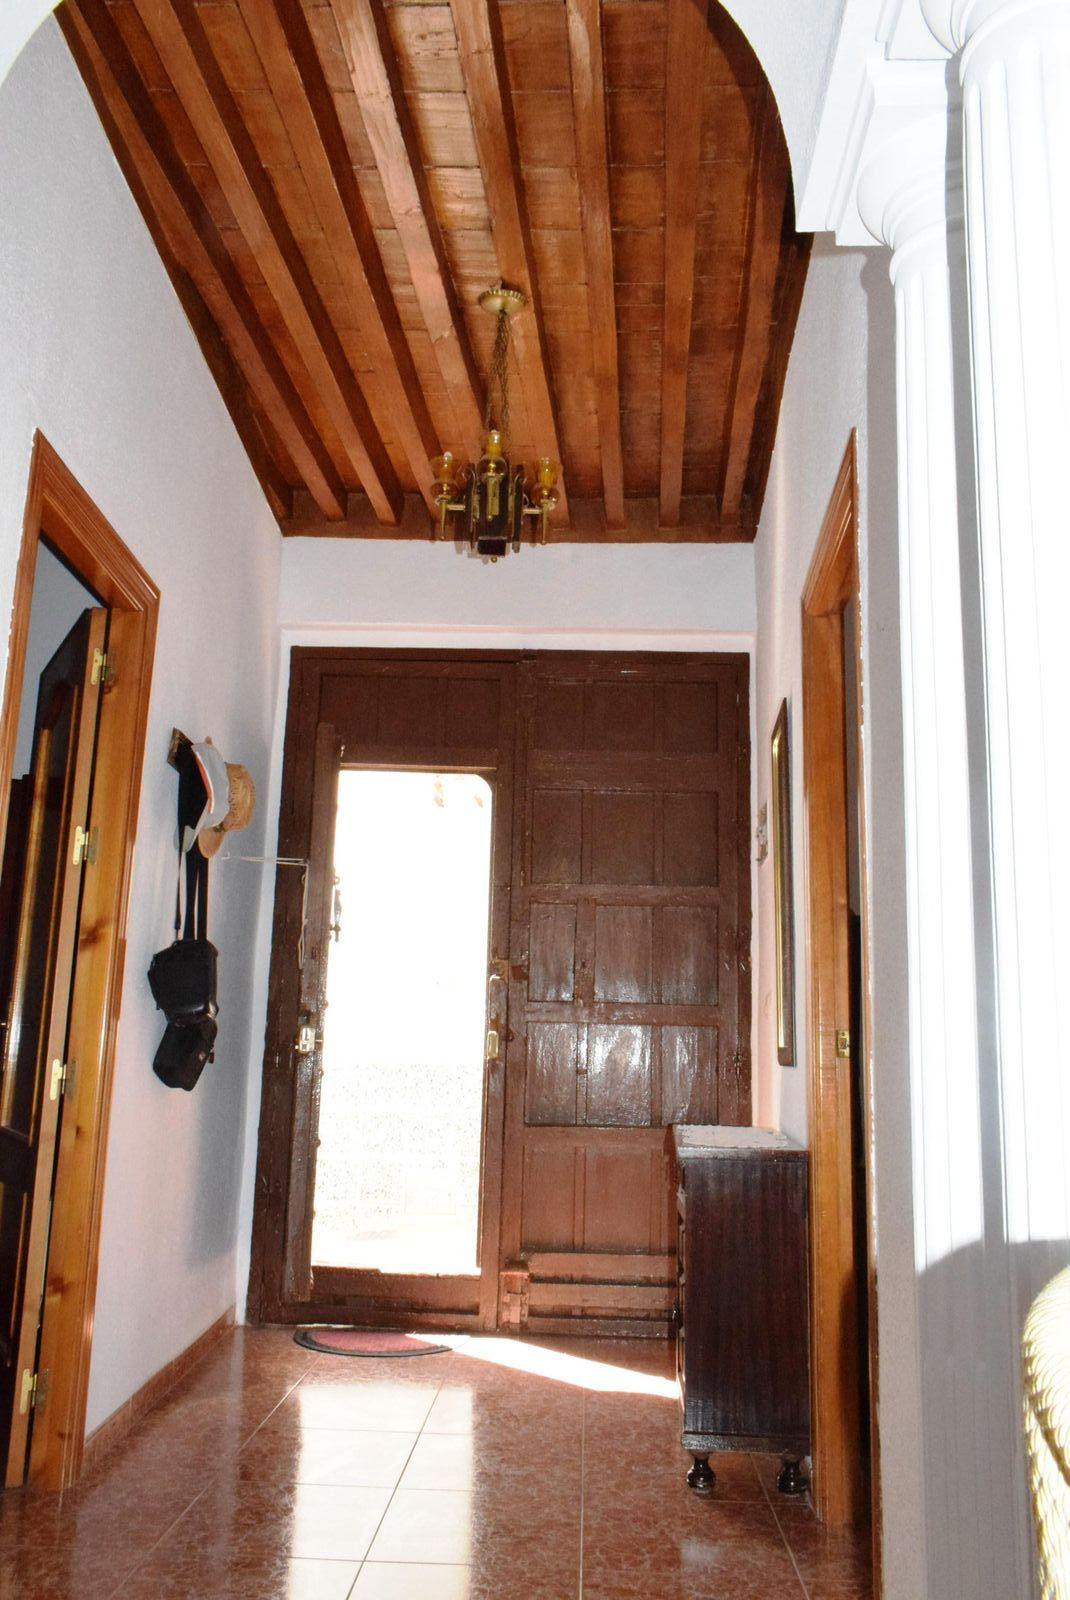 This large townhouse is located in the heart of Benamargosa, a step away from all amenities and only a 20 minutes drive to the coast.